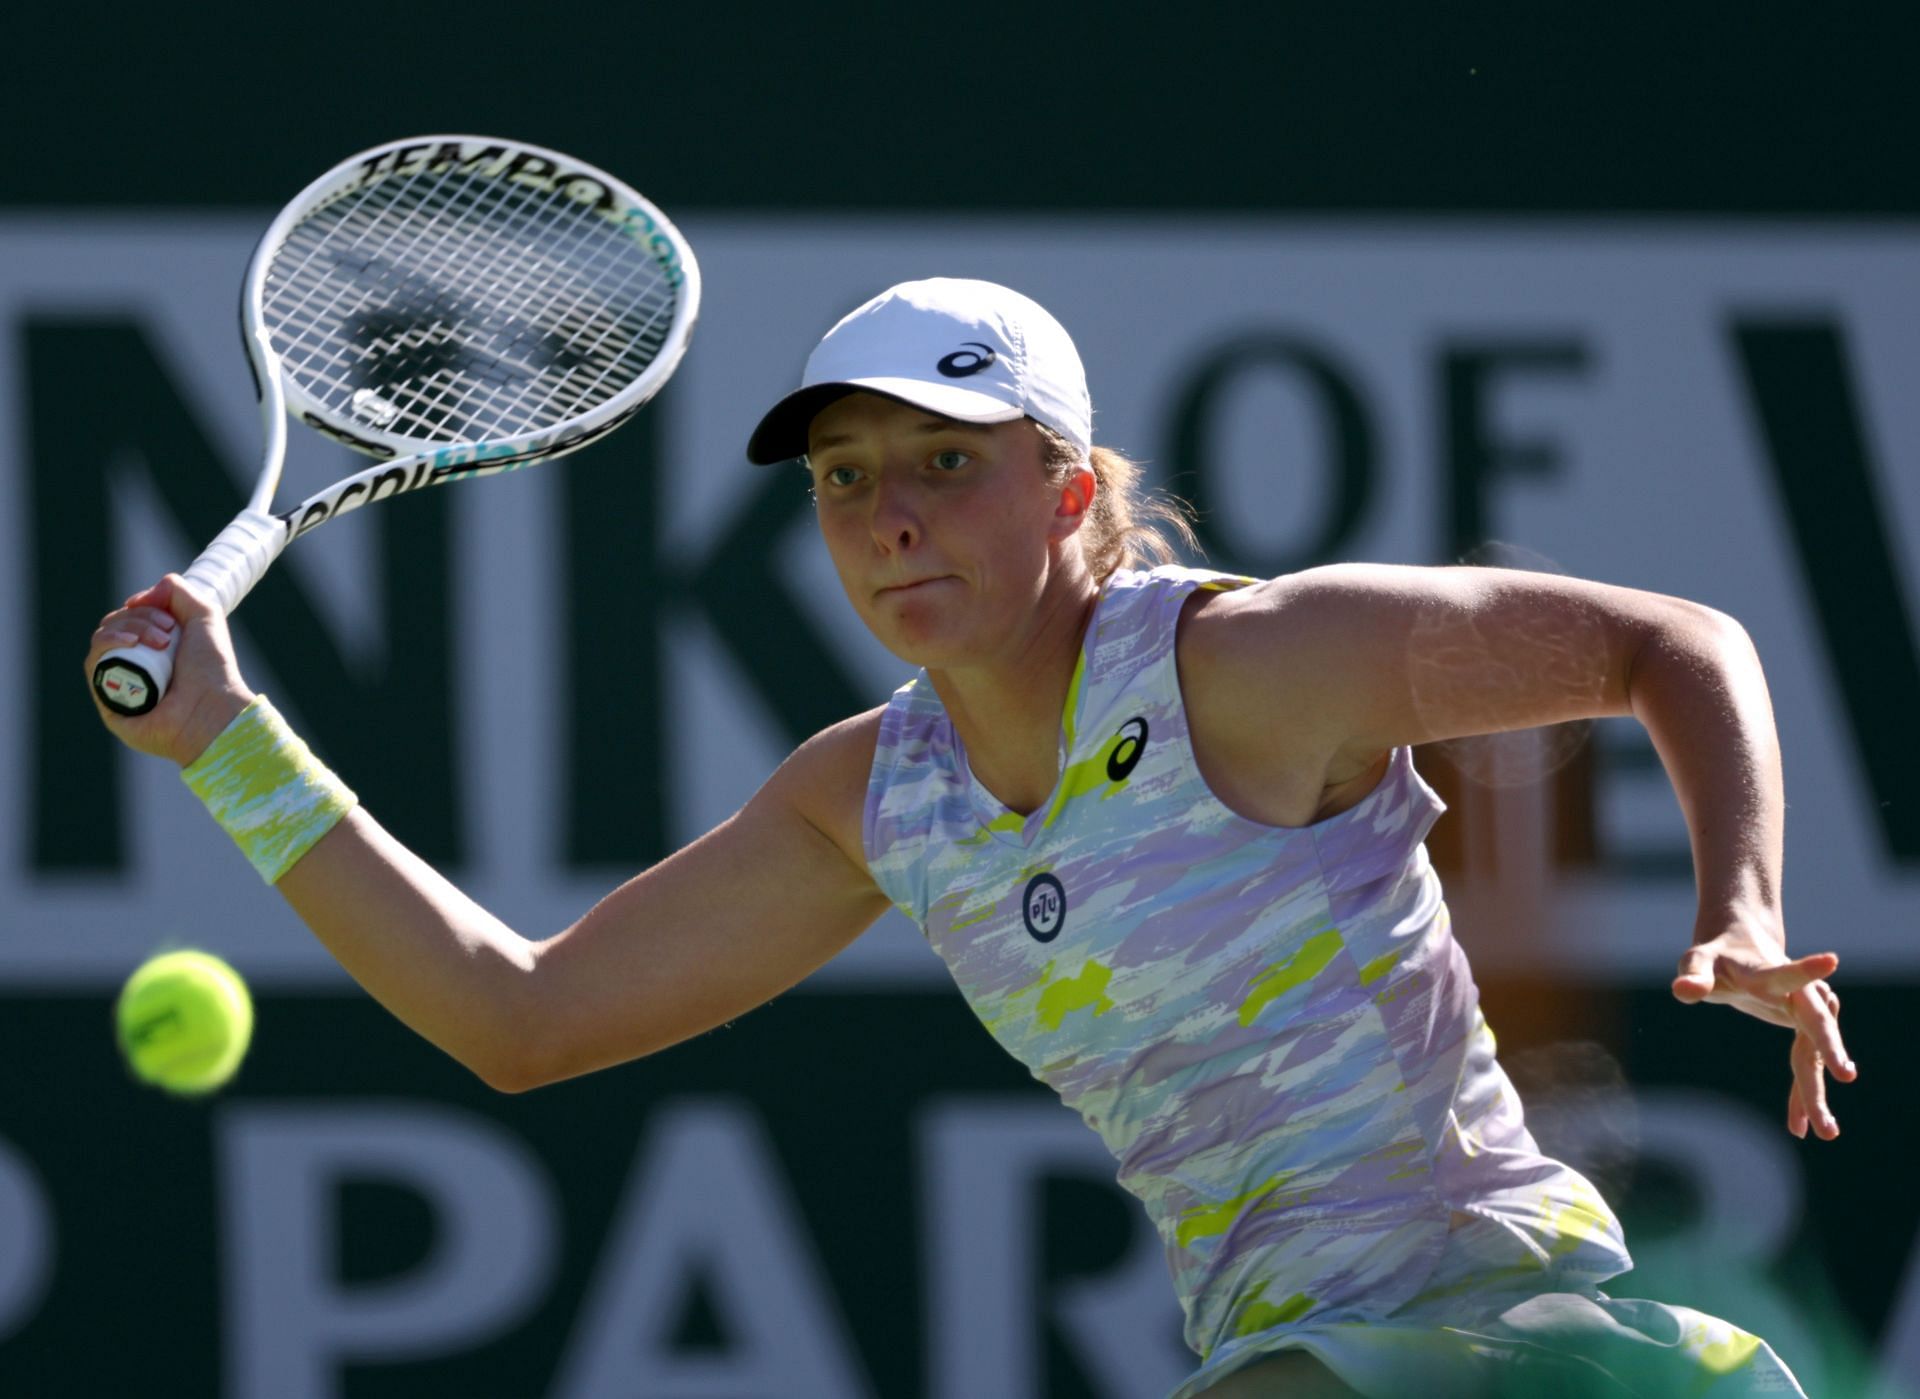 Iga Swiatek will take on Madison Keys in the quarterfinals of the Indian Wells Open